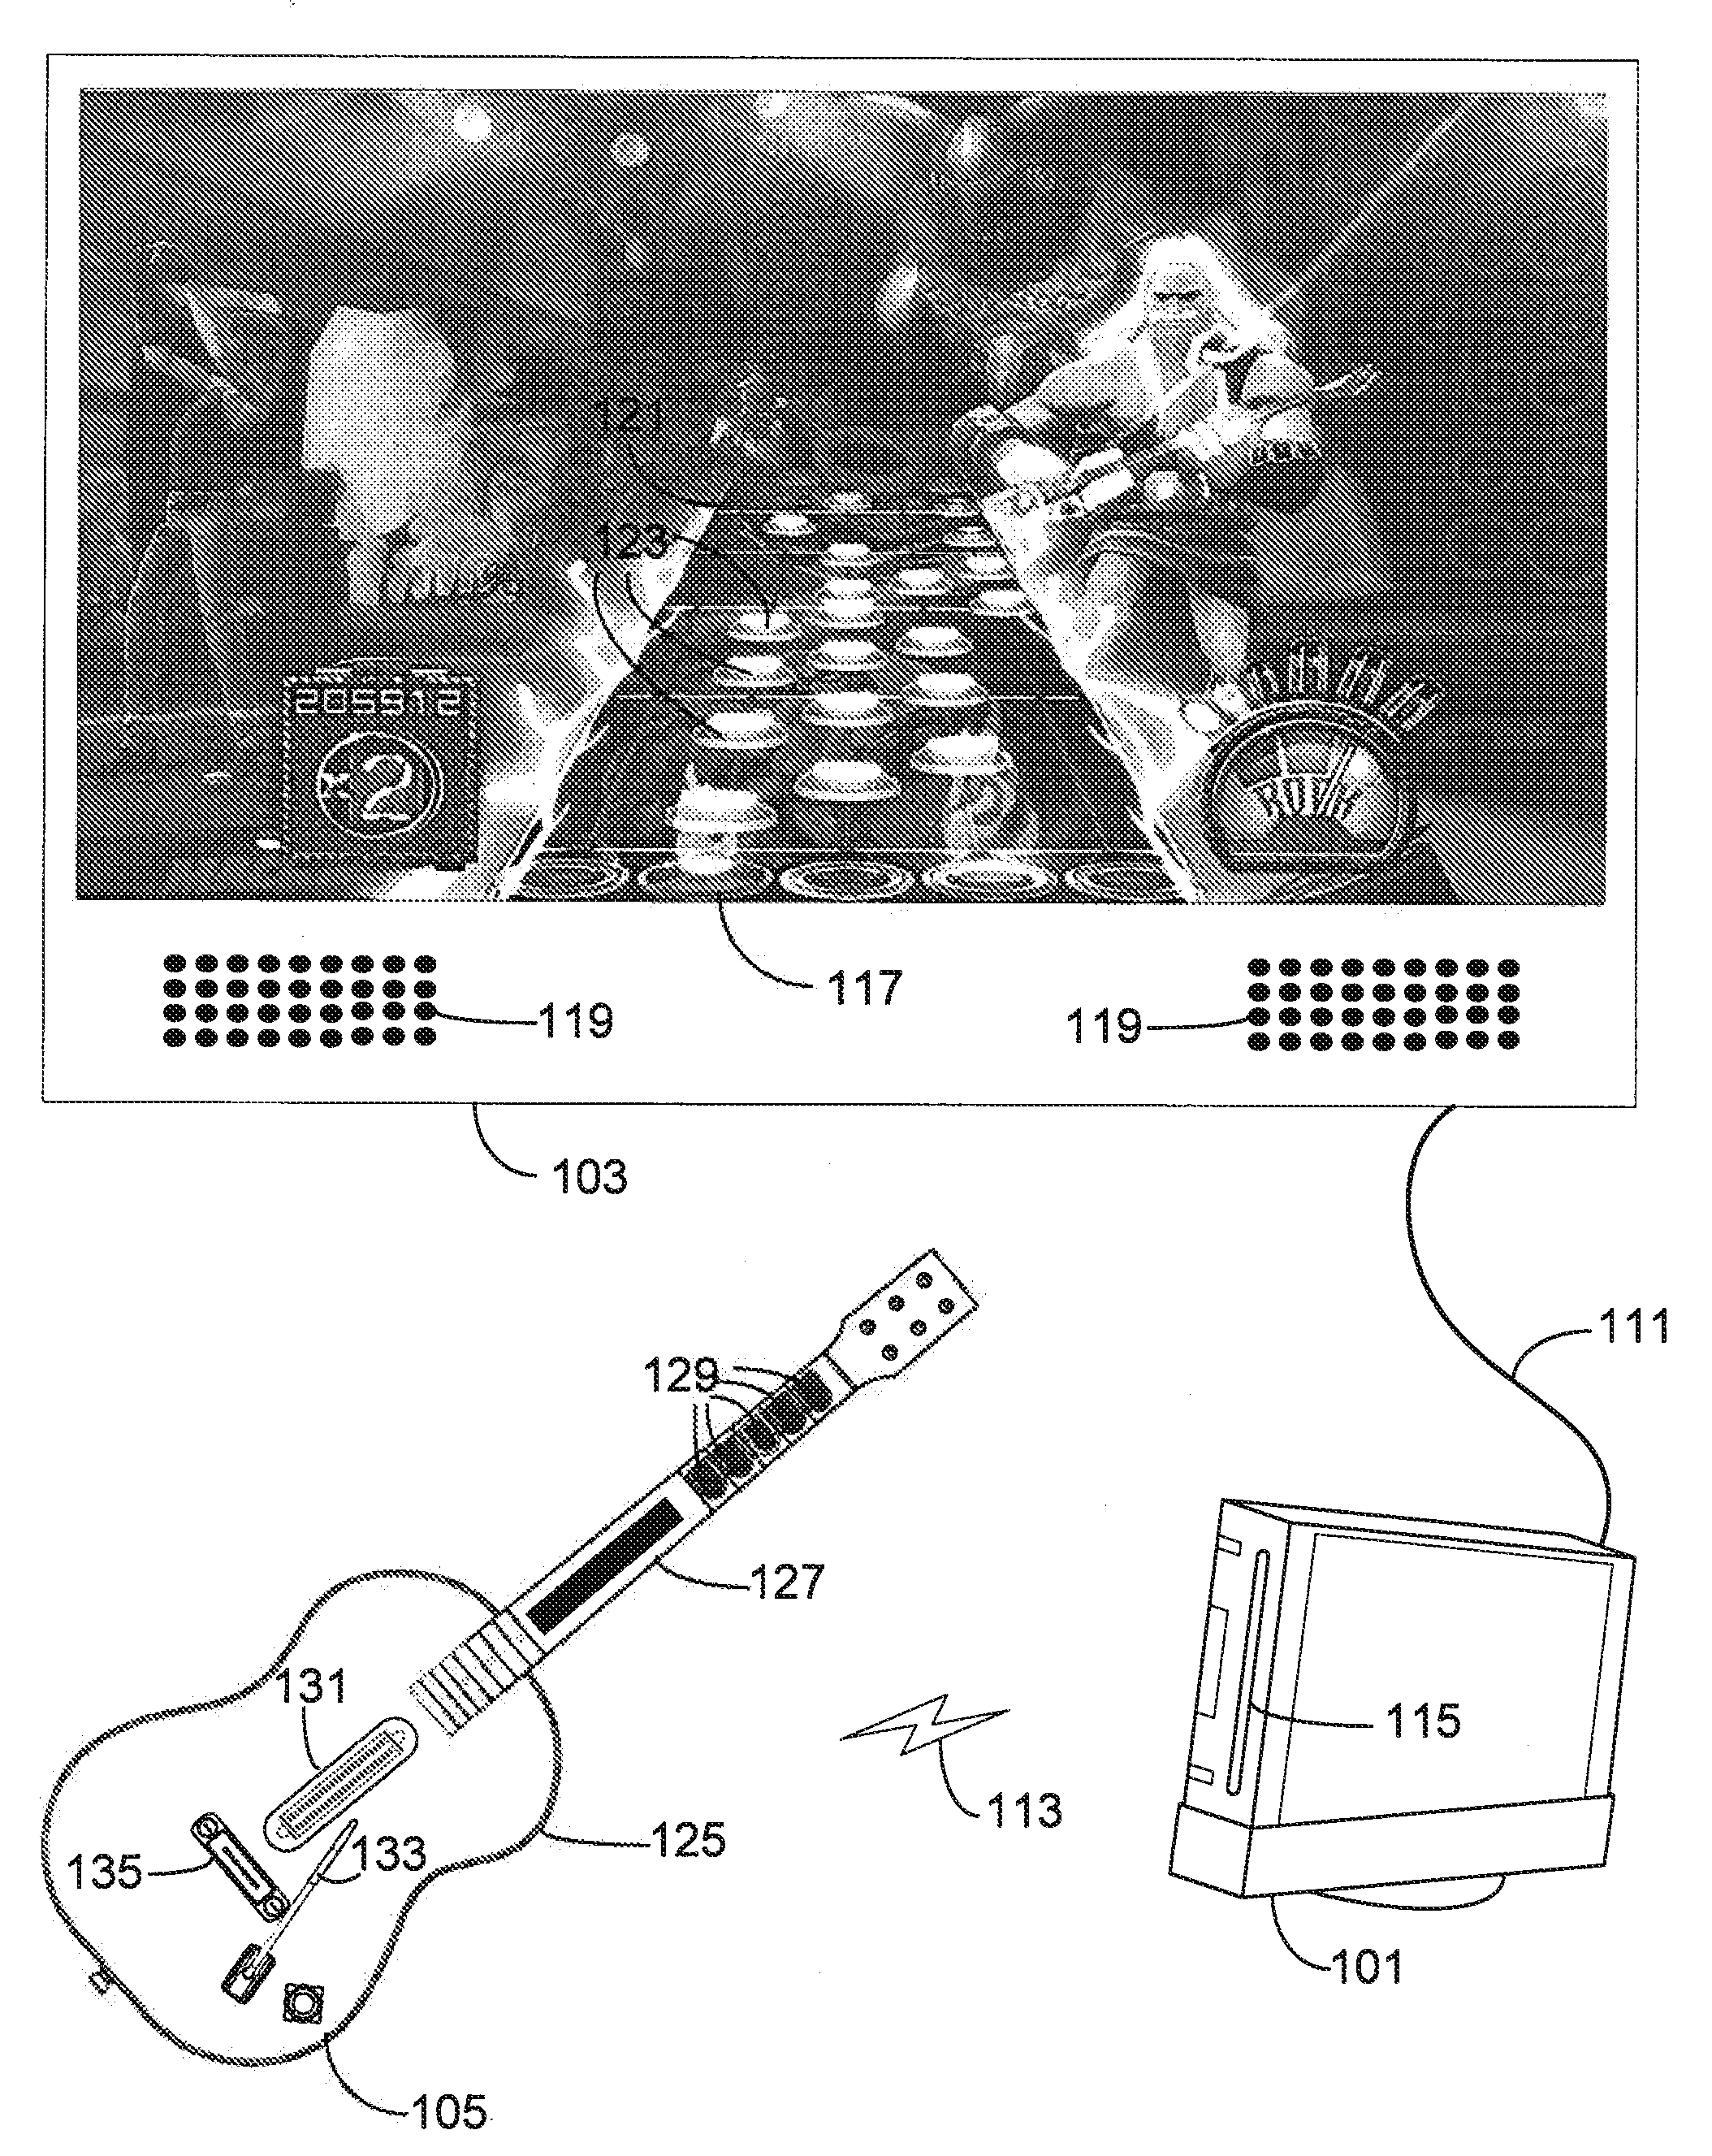 Music video game with guitar controller having auxiliary palm input